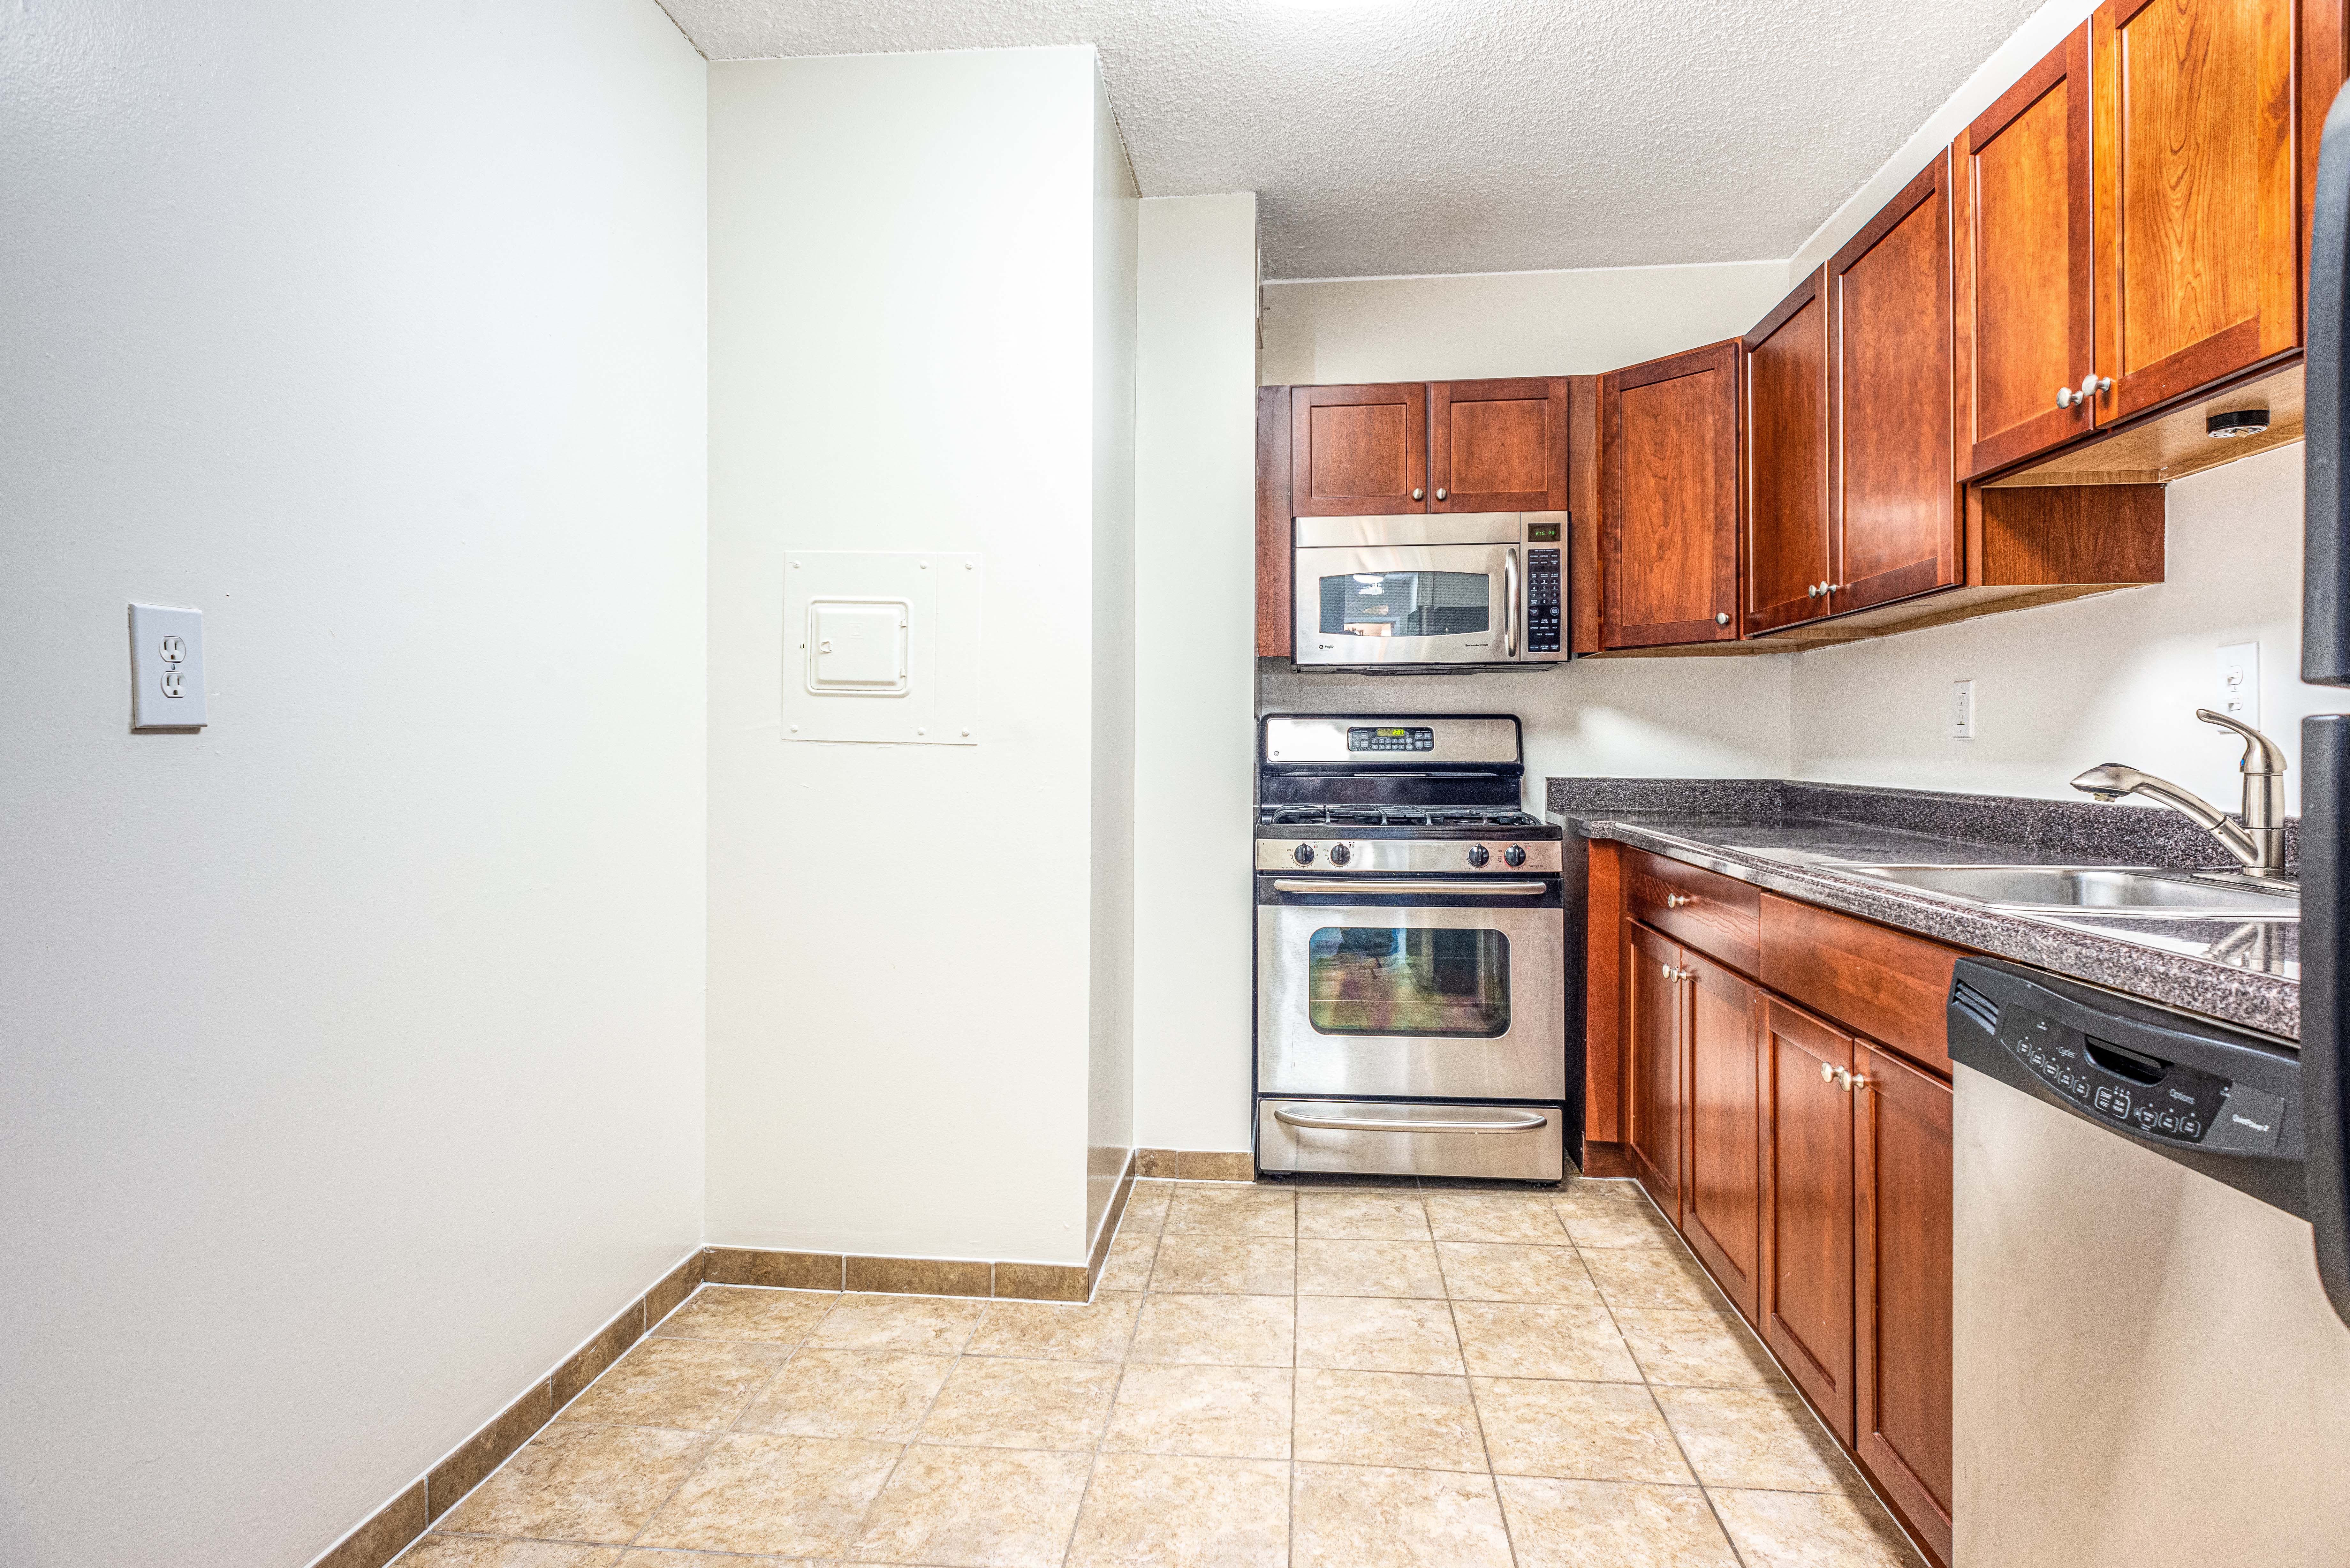 Updated kitchens with stainless steel appliances, cherry maple cabinets and gas range